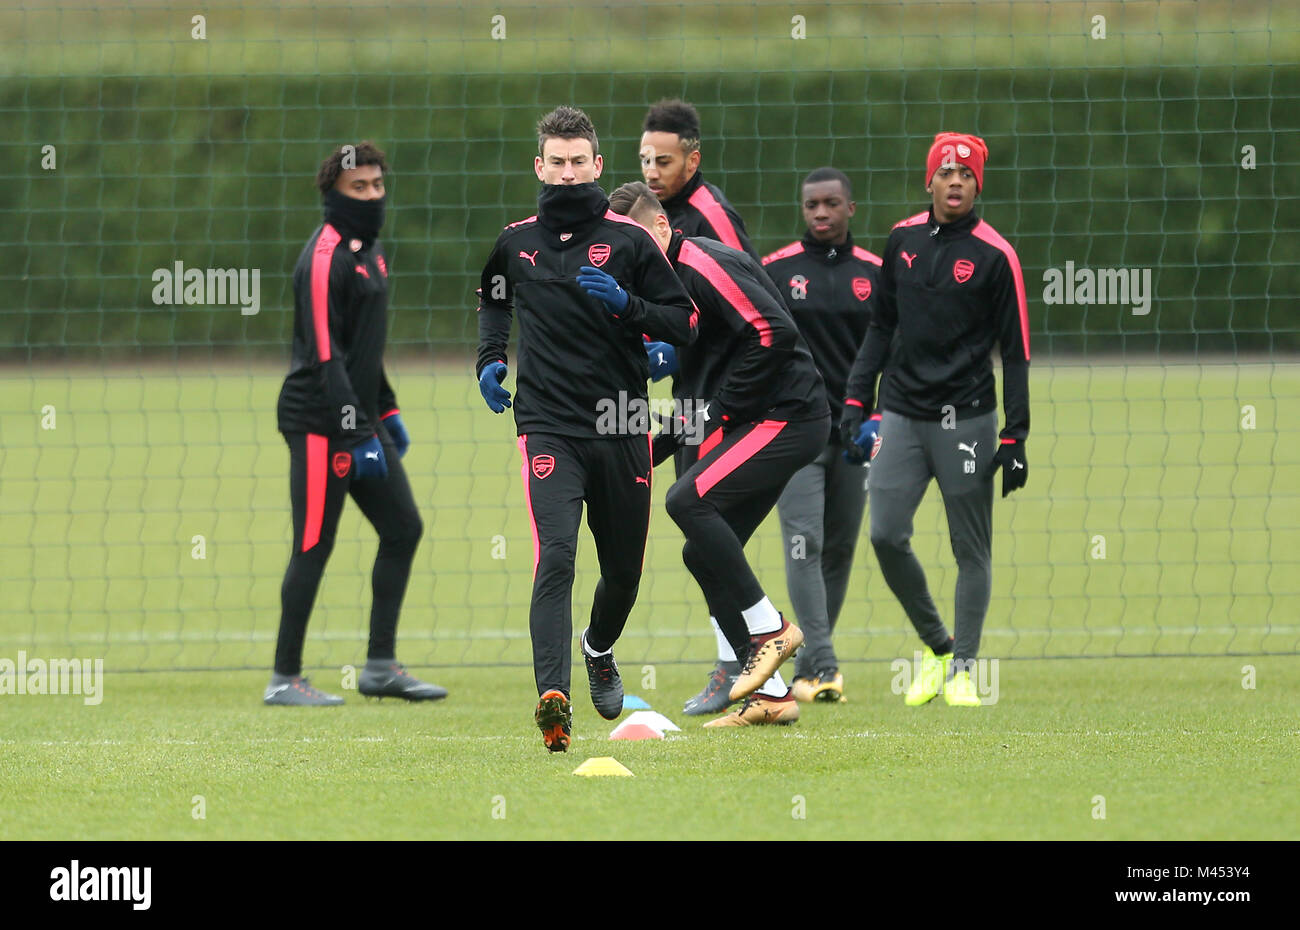 Arsenal's Laurent Koscielny (centre) during the training session at London Colney, Hertfordshire. PRESS ASSOCIATION Photo. Picture date: Wednesday February 14, 2018. See PA story SOCCER Arsenal. Photo credit should read: Steven Paston/PA Wire Stock Photo